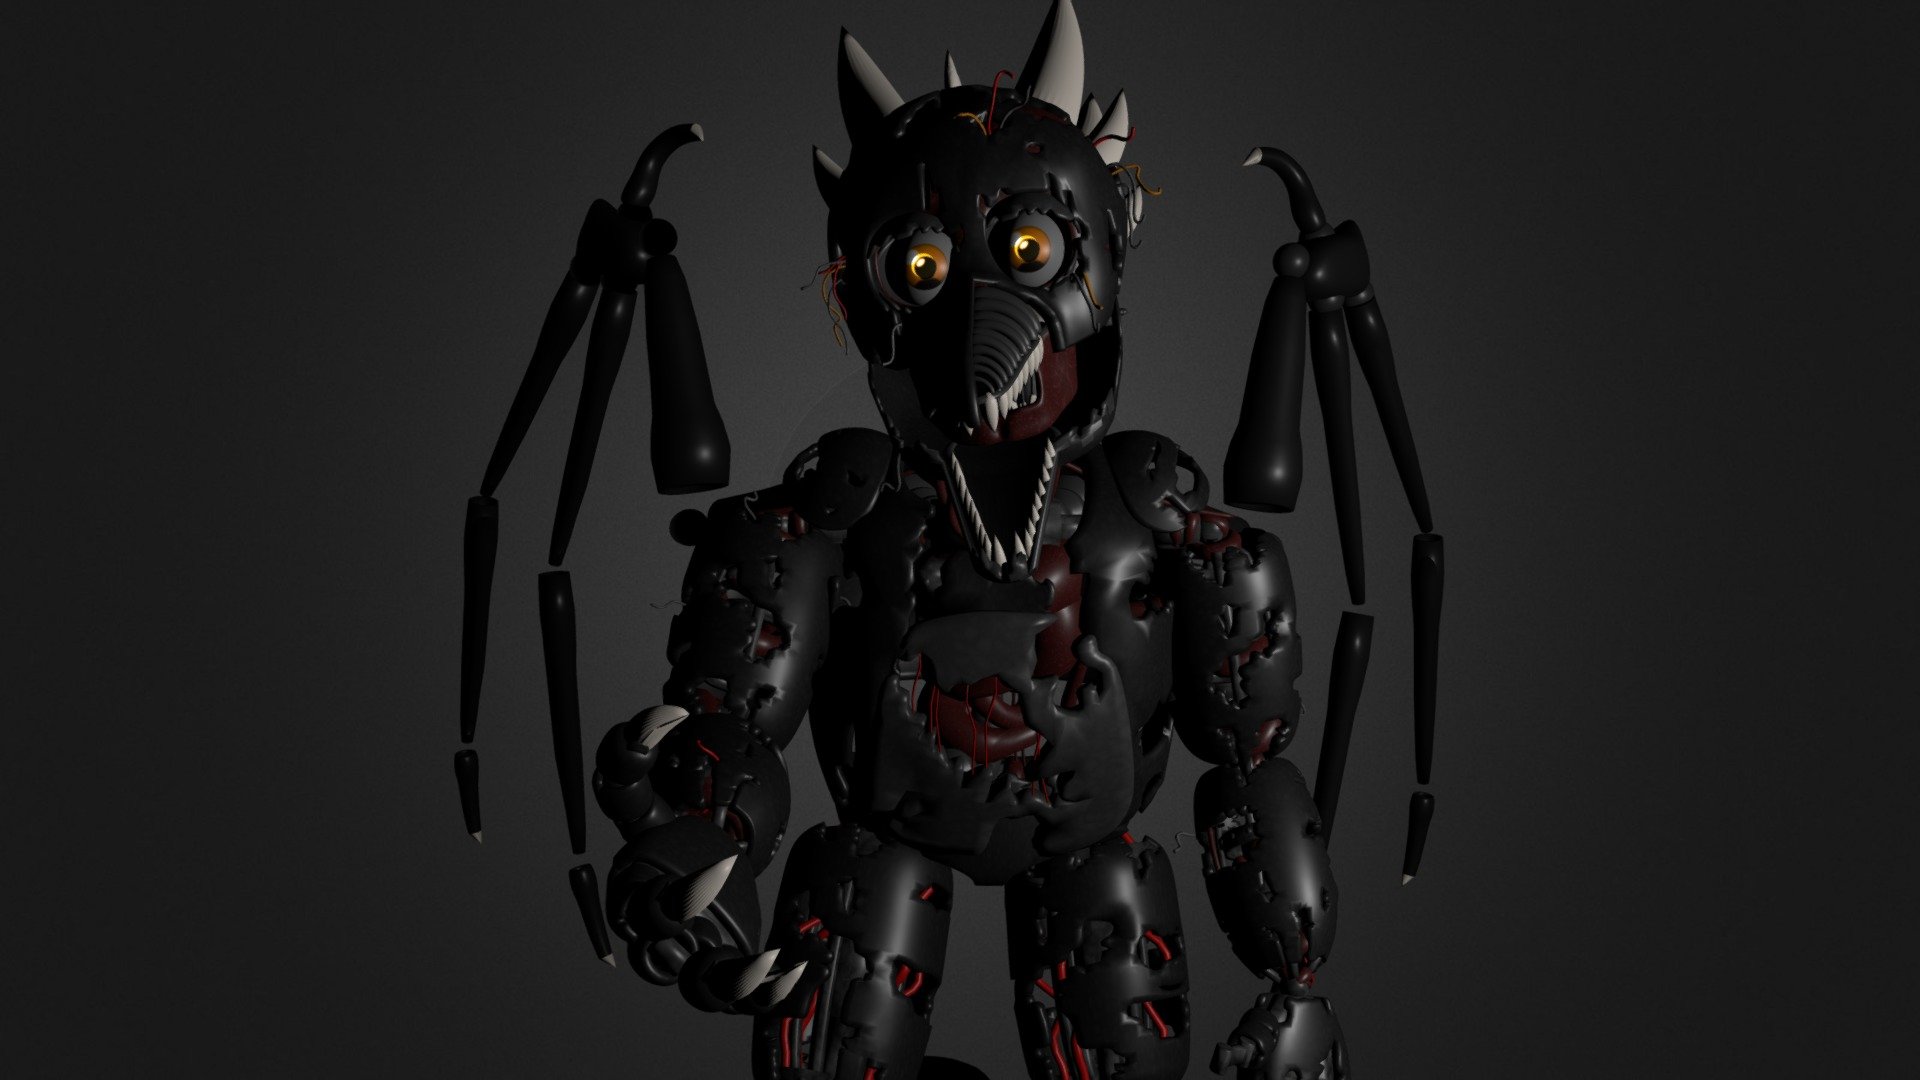 A much improved version of the previous Draco. Made in Blender, exported to fbx.

Improvements:



Has updated textures compared to the old one.



Improved skeleton and model peices.



Posed.



Smoother peices.



Sad part is, without his left thumb in that position or all left fingers perfectly straight, his claws start to float off his fingers. No problem with the right hand, though. Tail floats off and resizes in fbx, but in the original blend file, it is the proper size and curled around his left side.

&ldquo;Also, don't forget to watch the backroom. Draco might get a little&hellip; active&hellip; tonight, and while he doesn't appreciate the other animatronics, he doesn't like you either. So, yeah, have a great night, and remember, you are perfectly safe!